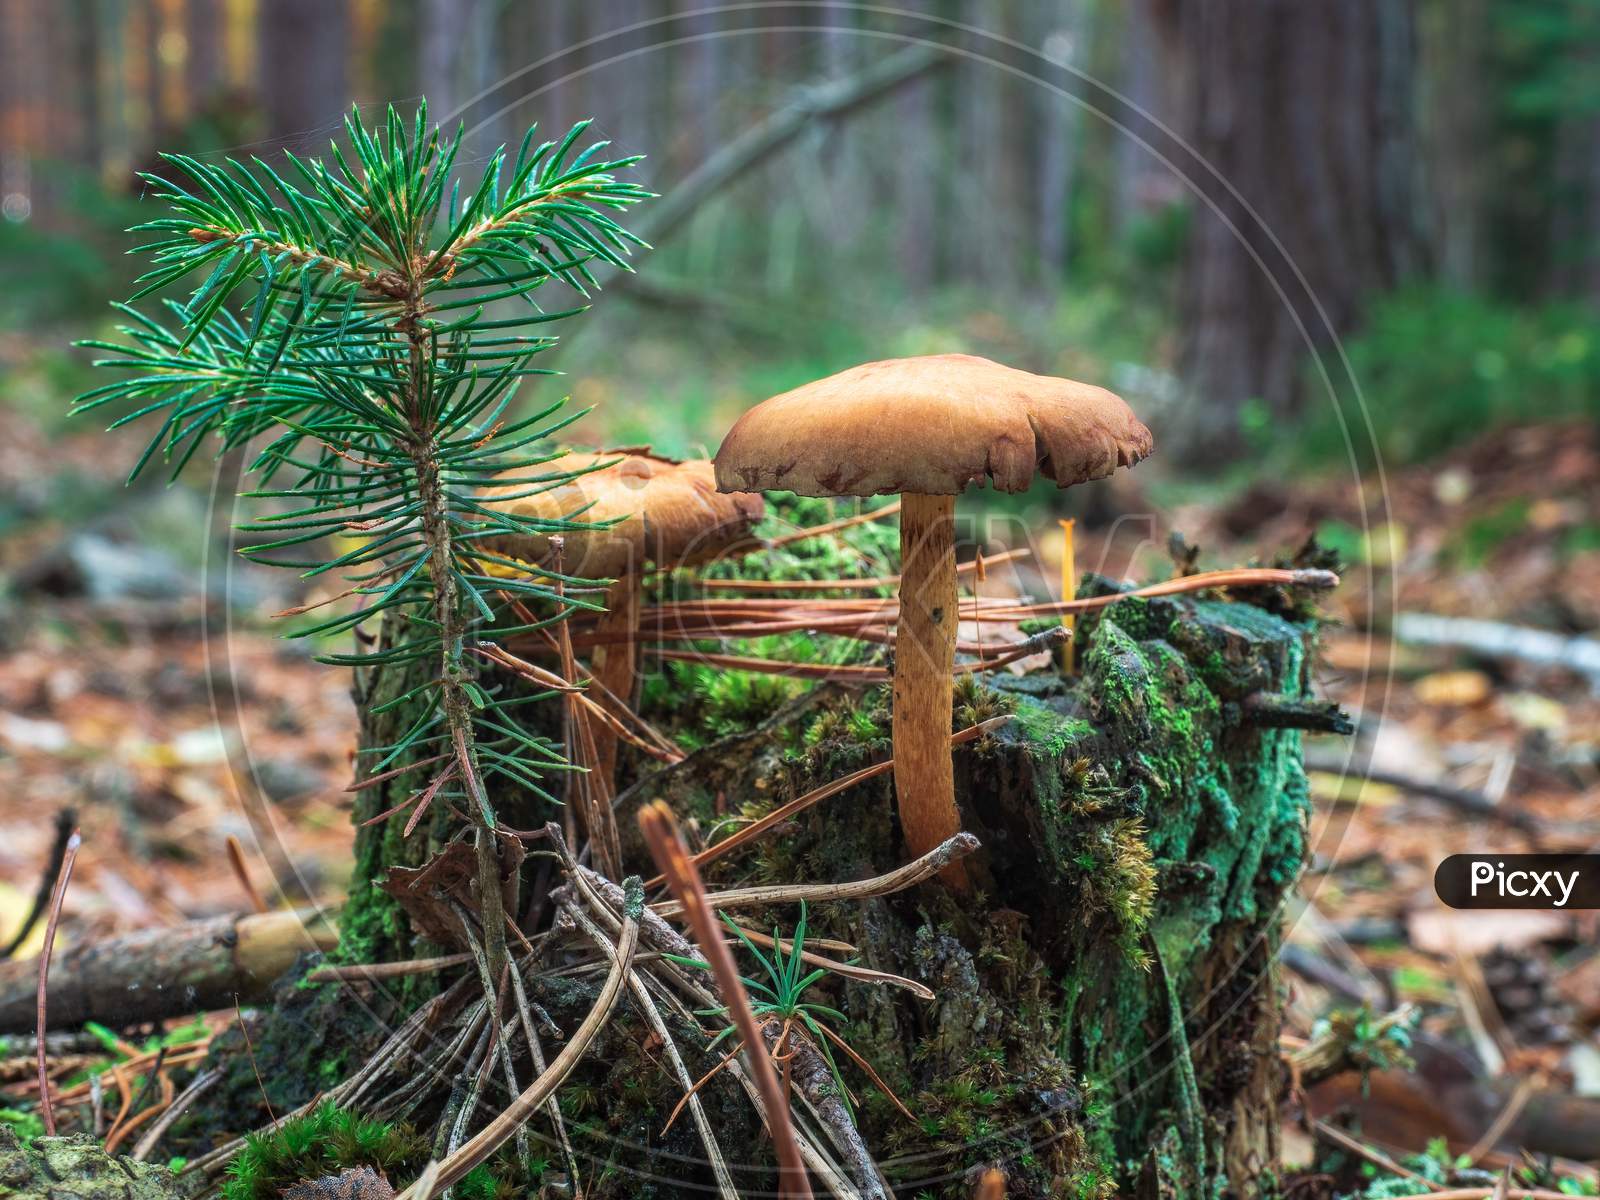 Common Cortinar Or Webcap Mushrooms And Young Spruce Tree Growing On Small Trunk Covered With Moss.